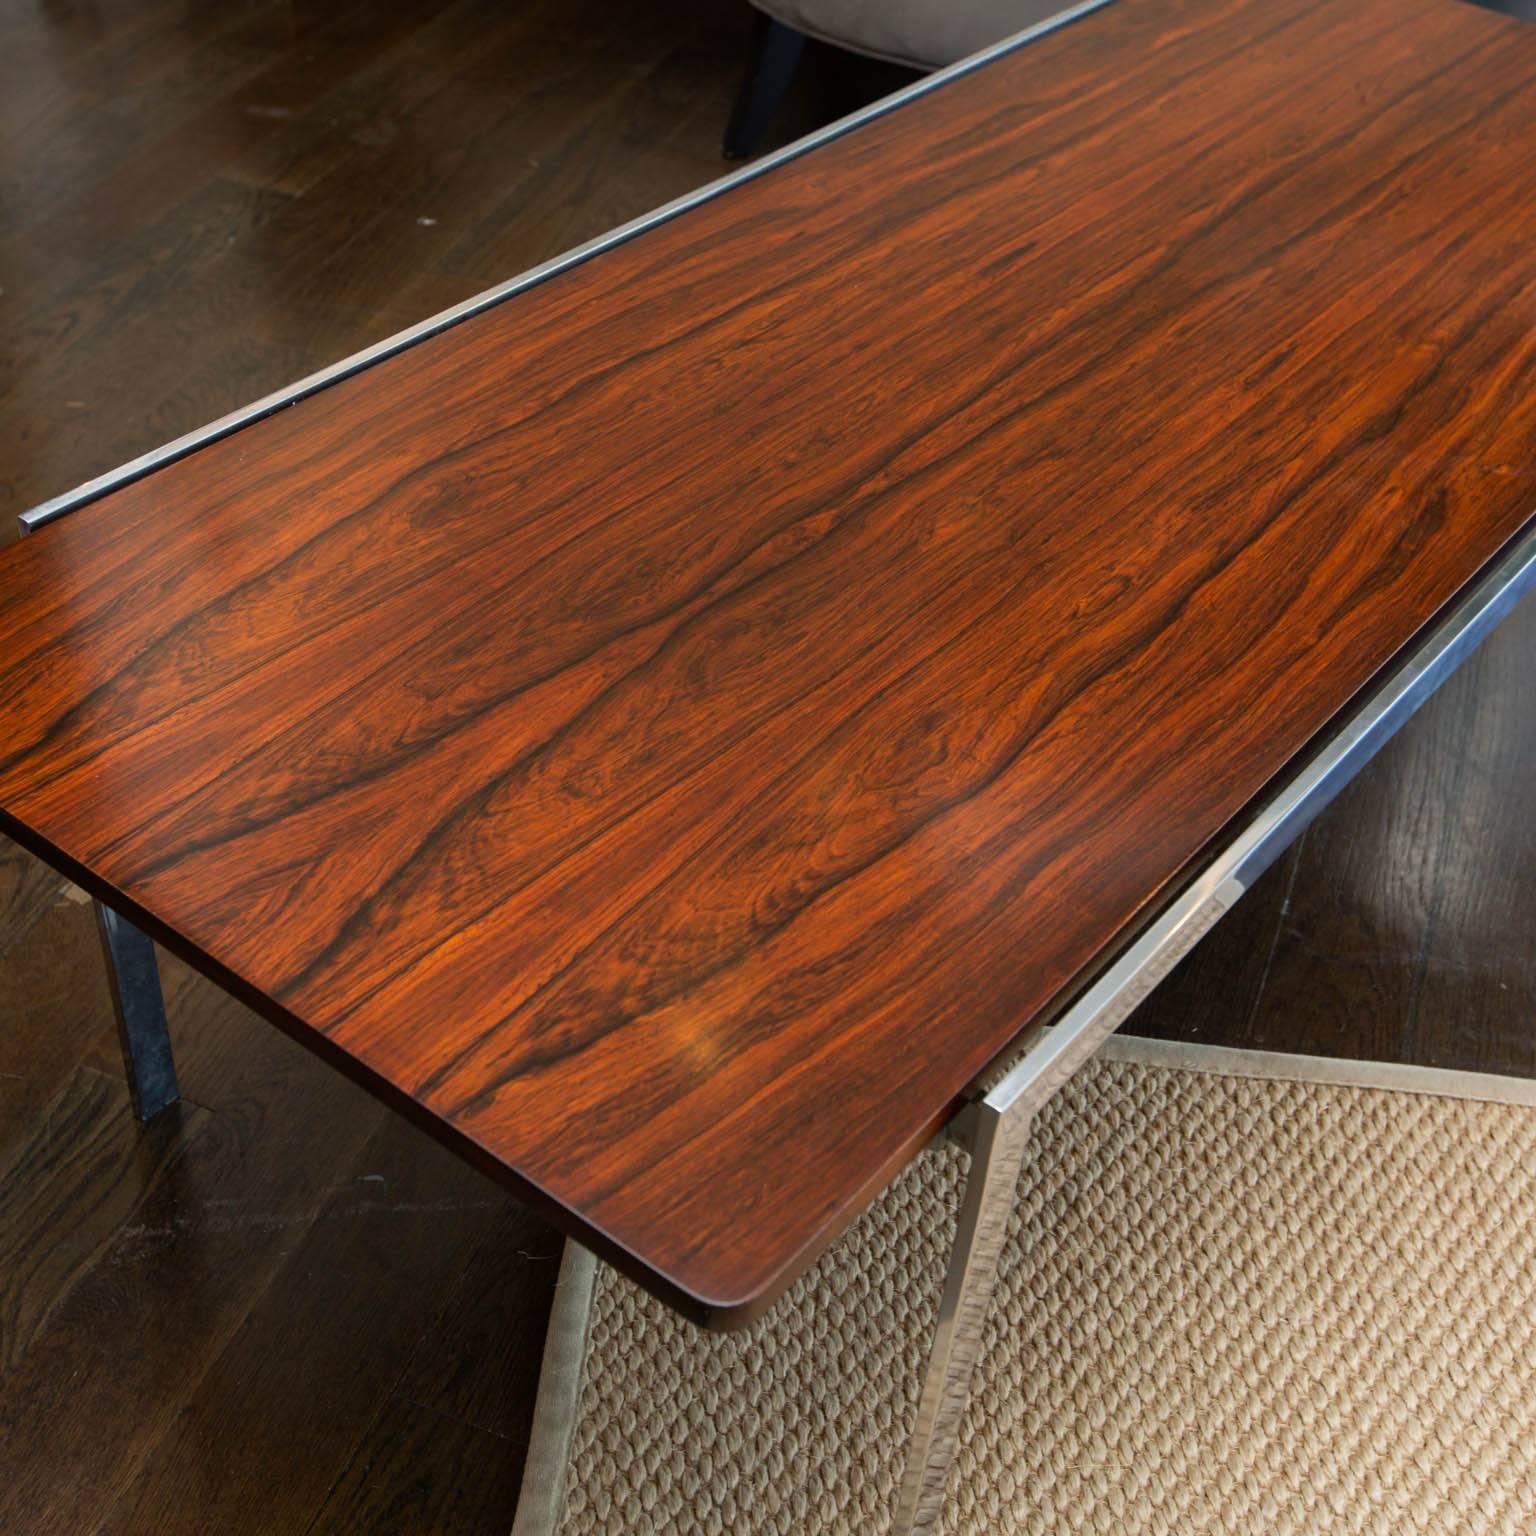 Danish modern coffee table, just refinished, with beautiful roswood veneer.